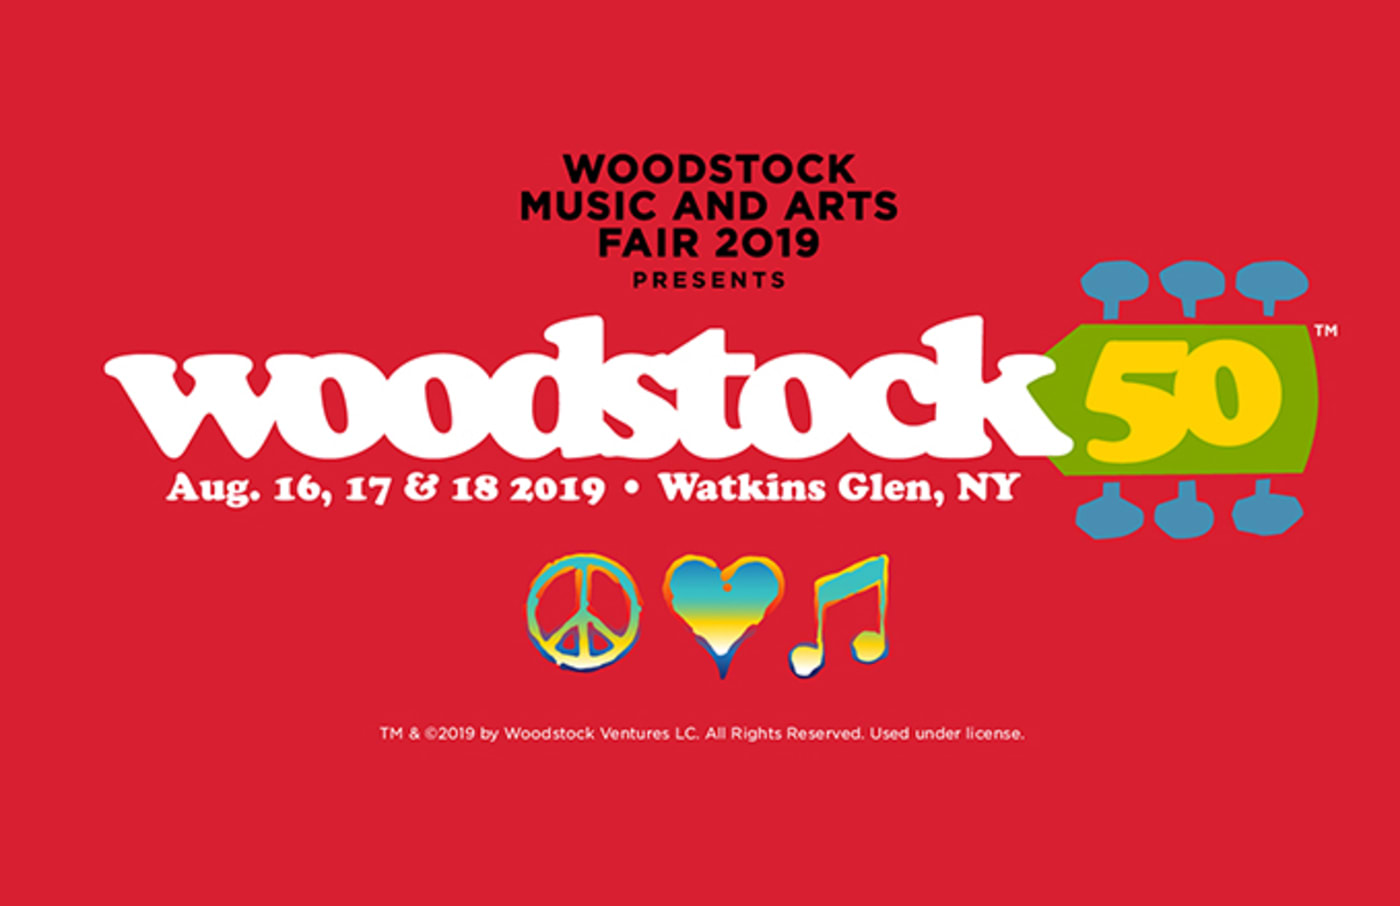 This is a photo of Woodstock.